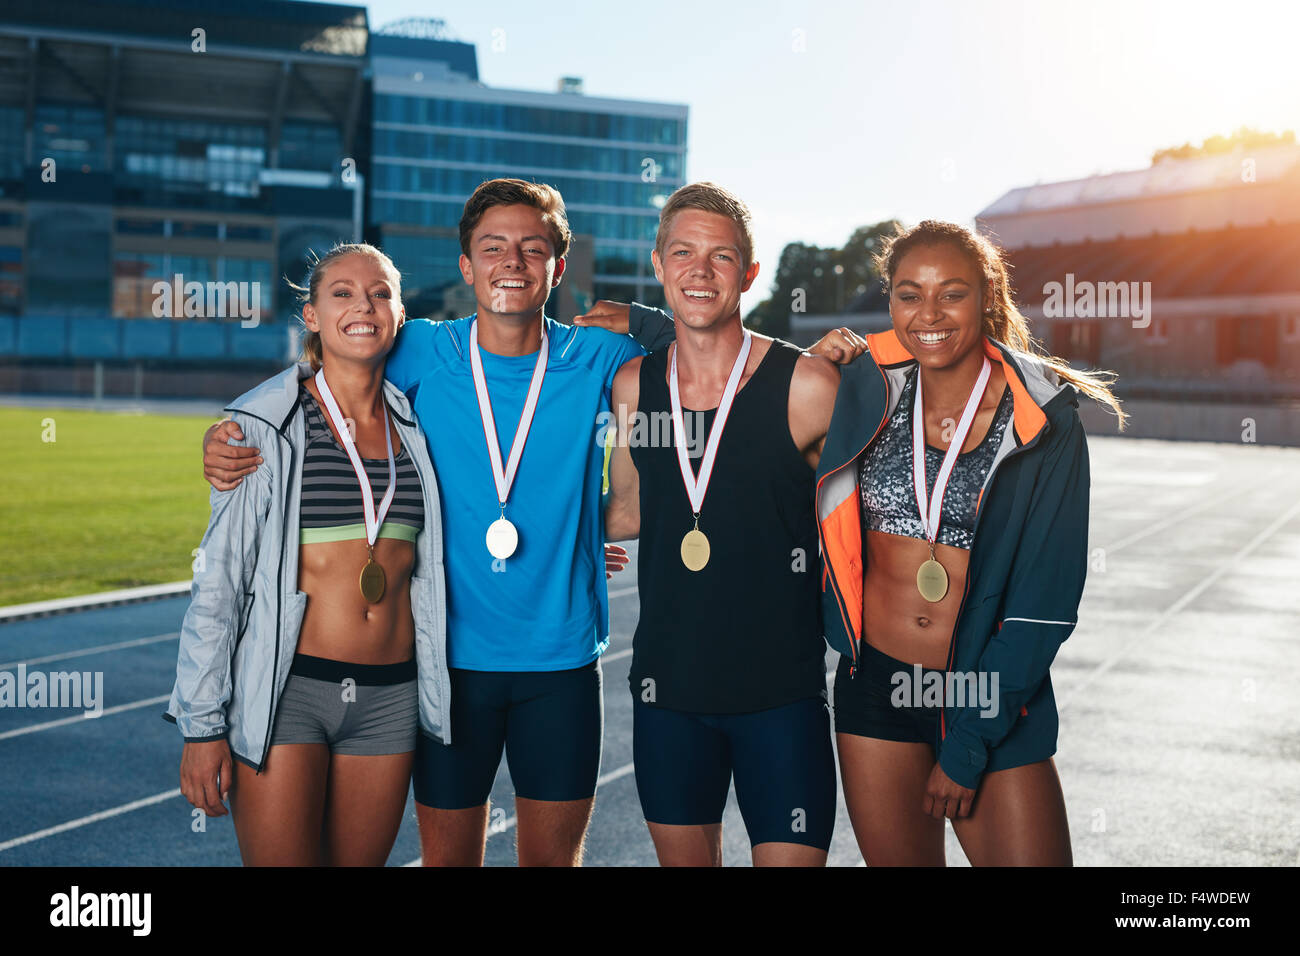 Group of athletes with medals .Two young woman and man together looking at camera and smiling while standing on athletics race t Stock Photo